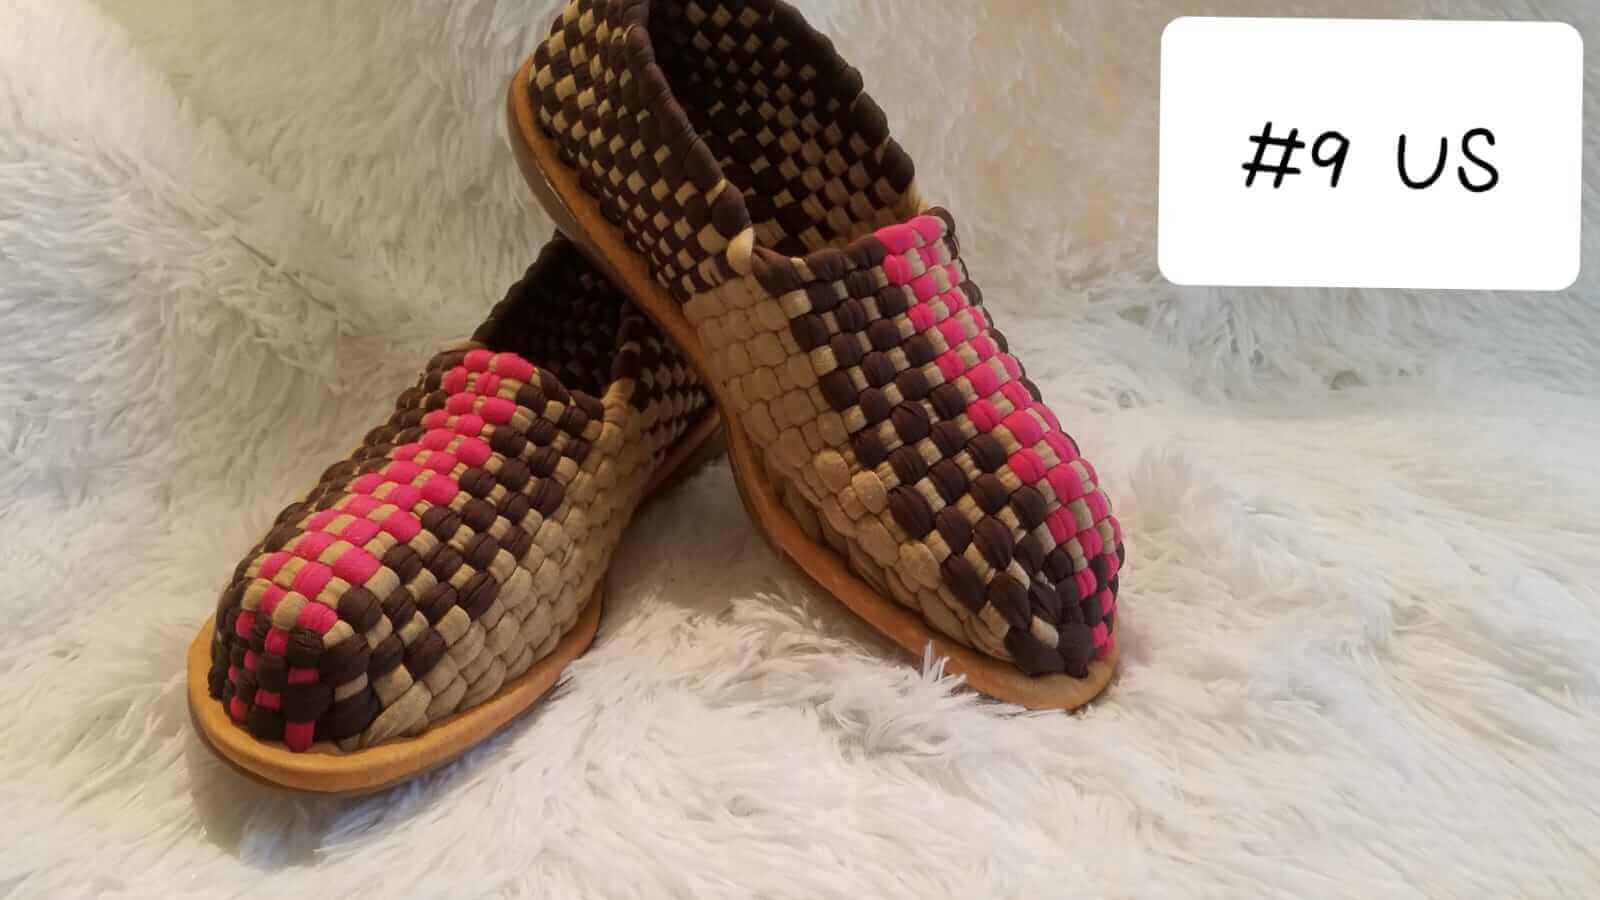 woven mexican sandals